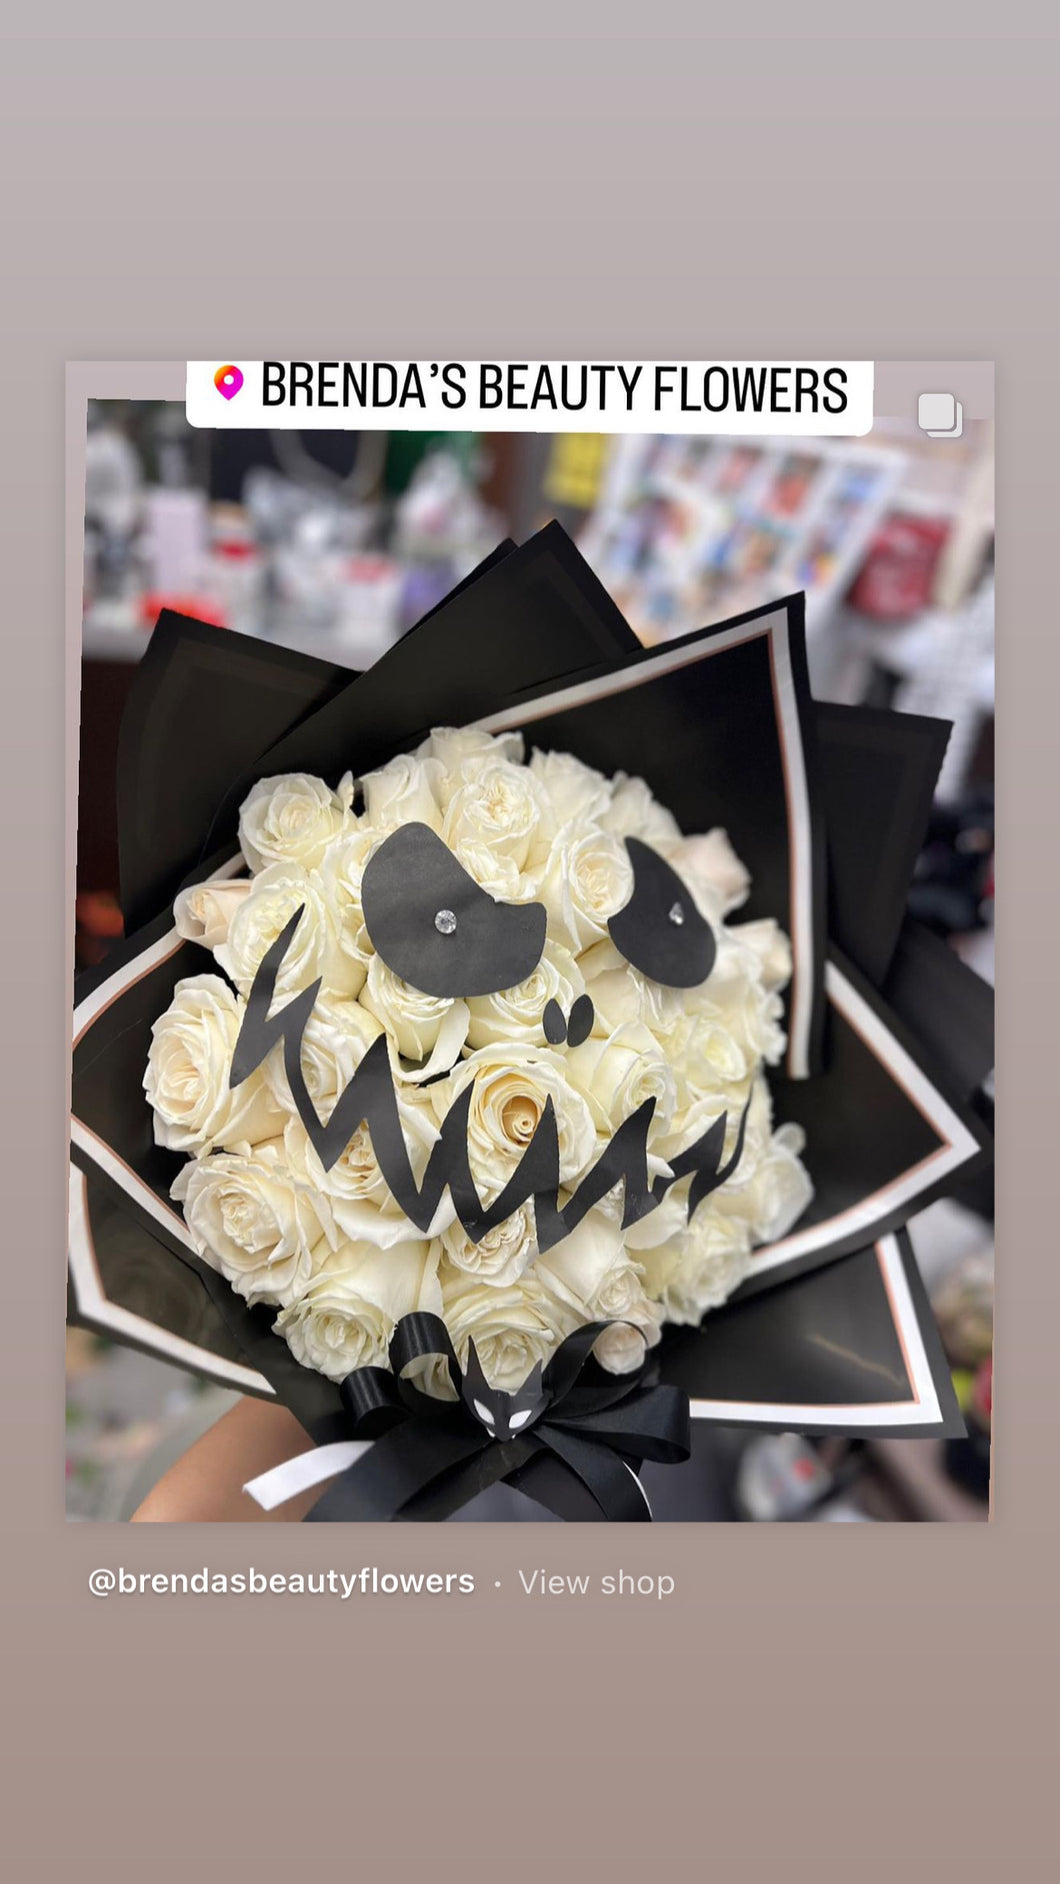 Nightmare before Christmas inspired  bouquet